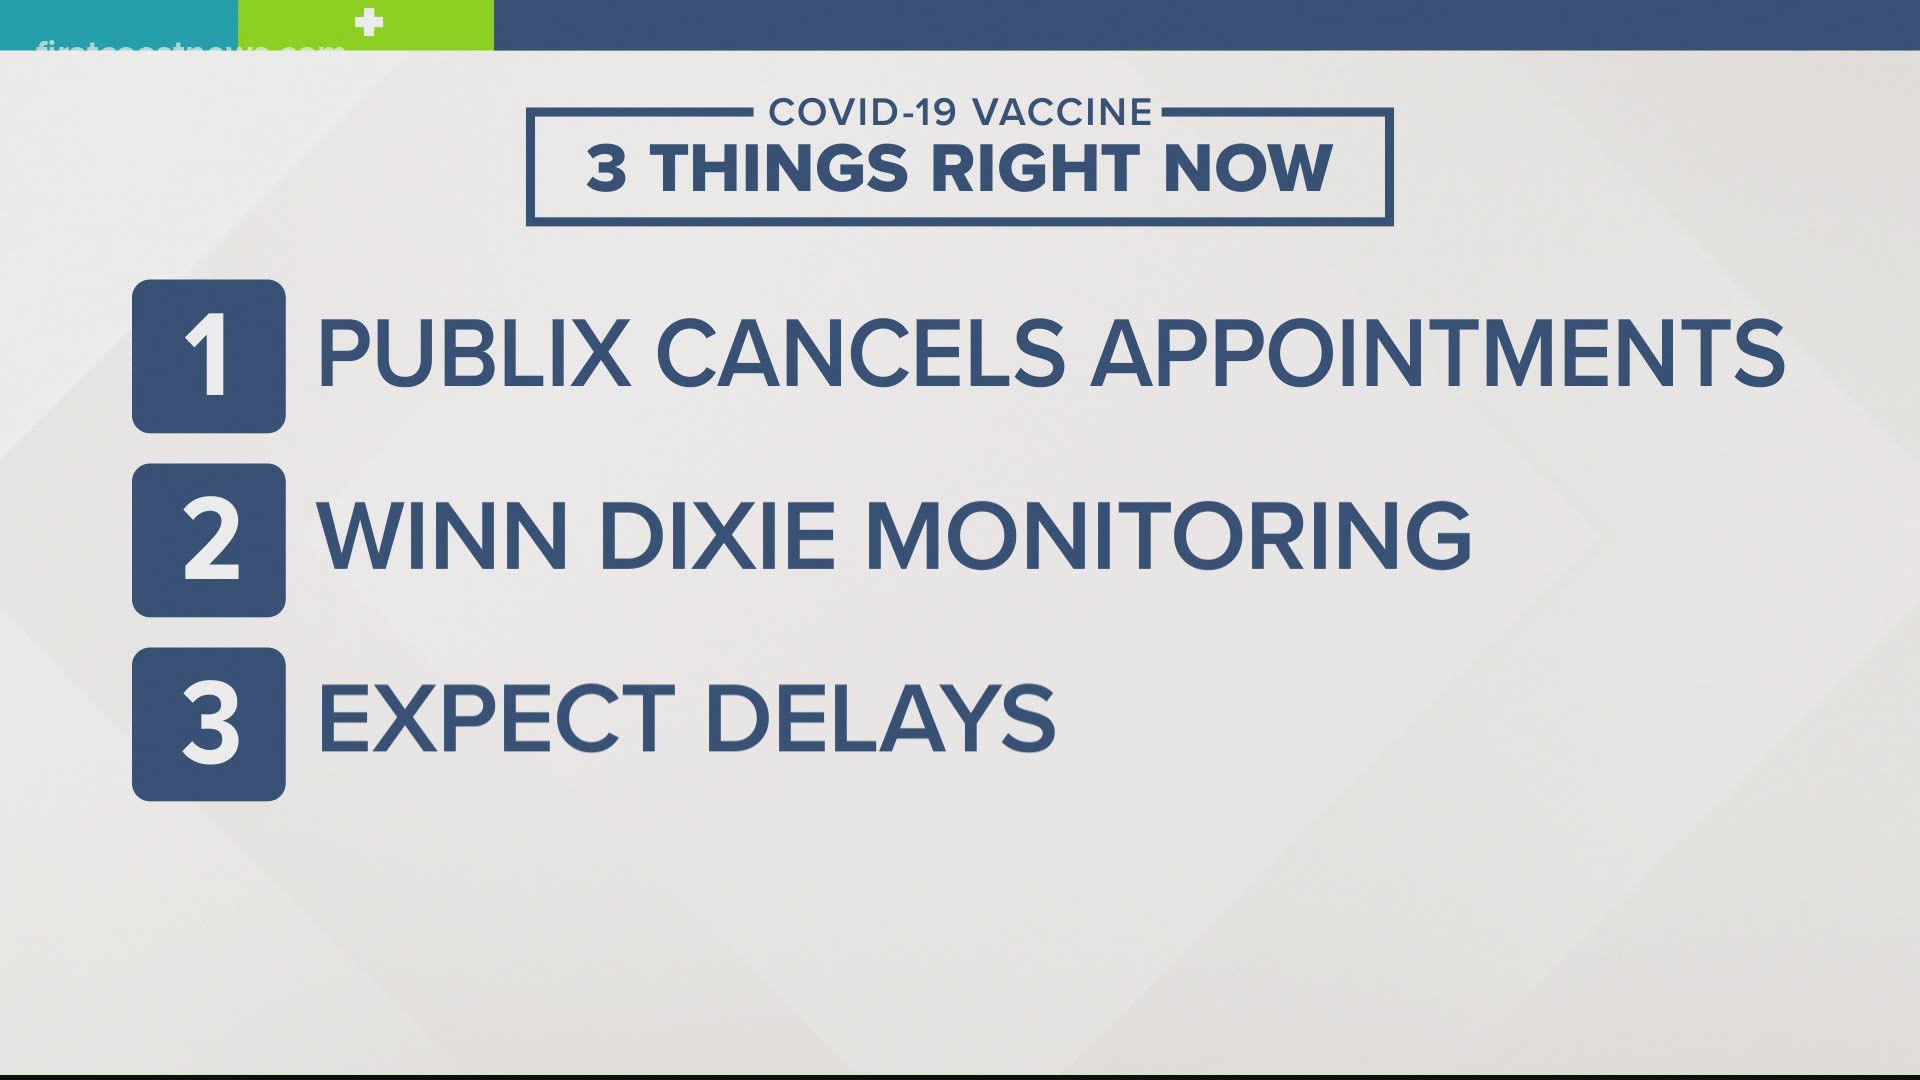 Delays in getting the vaccine may be caused by winter weather.